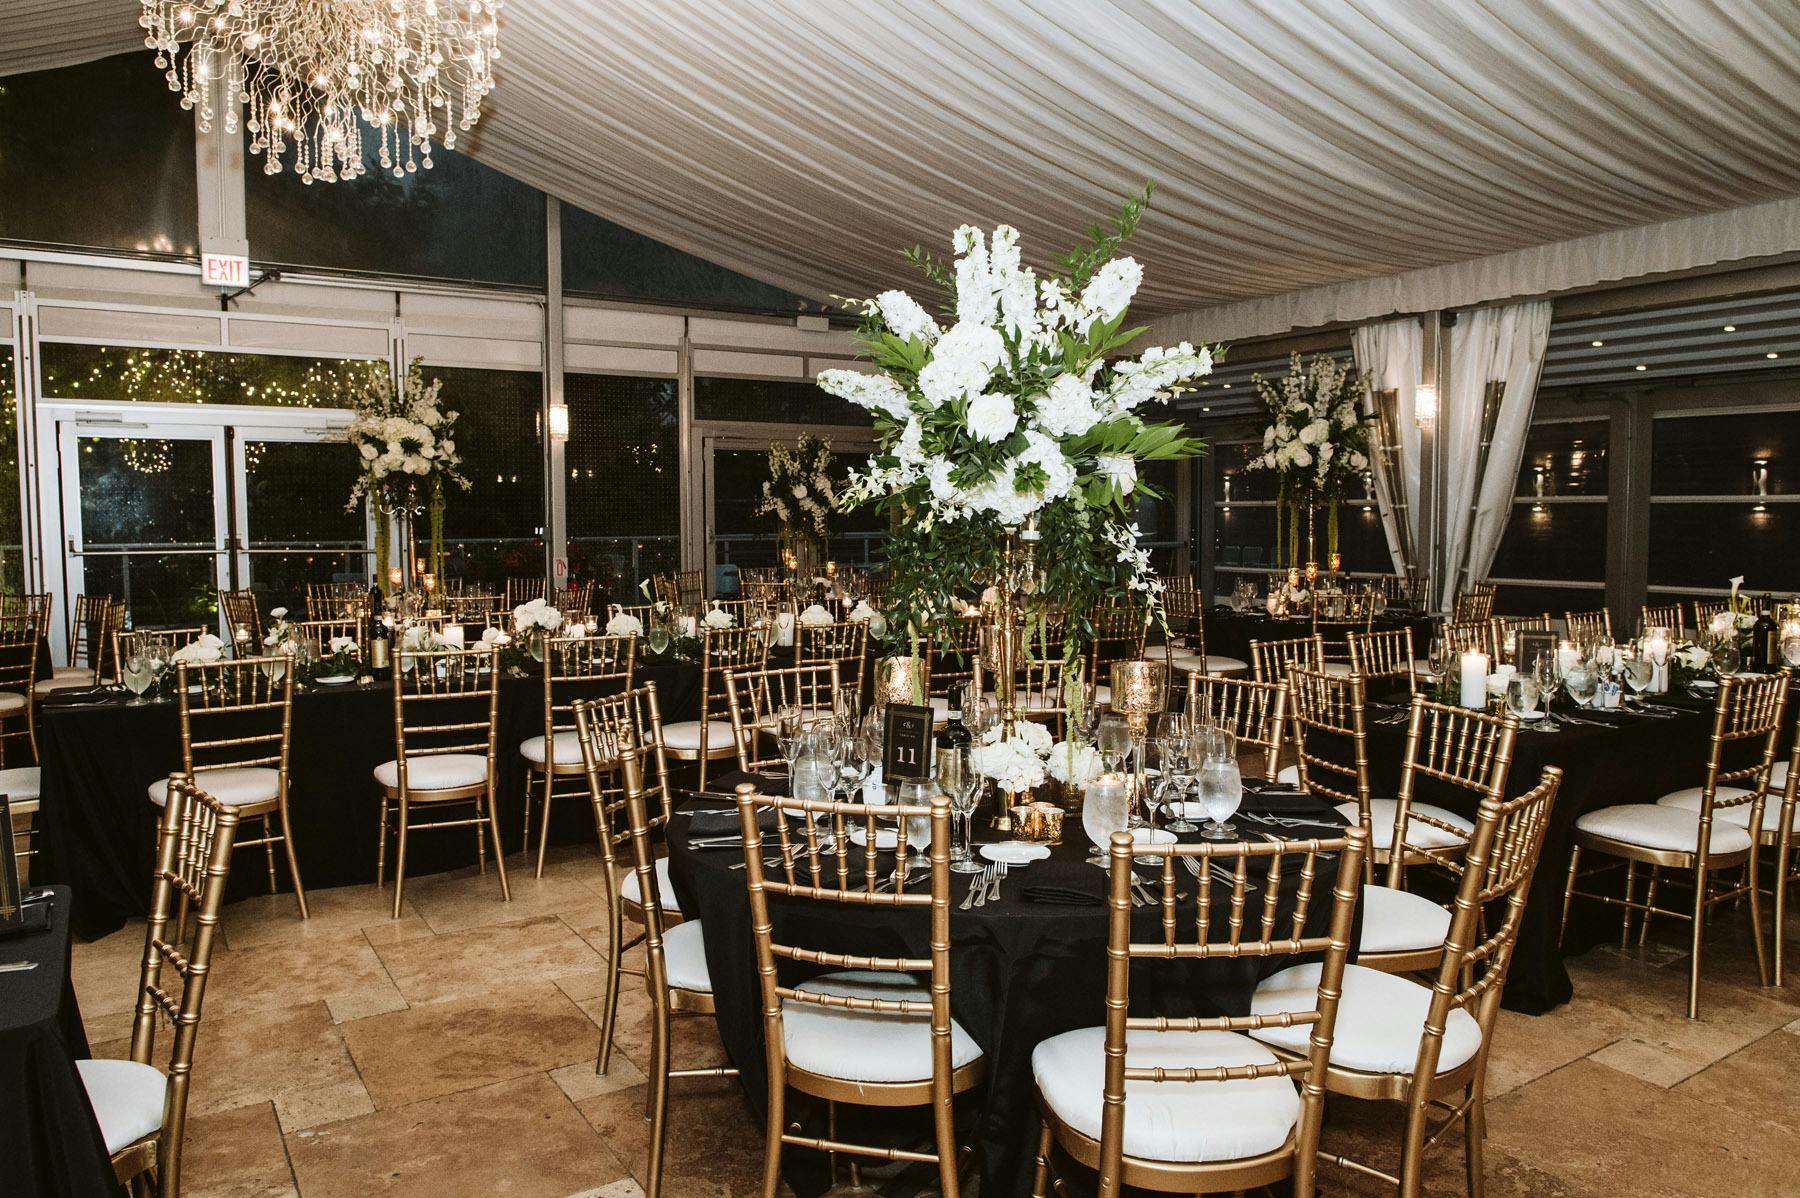 Tented Wedding Reception Venue with Gold Chavari Chairs, Black Linen, and Towering Sputnik-Style Hydrangea Wedding Centerpiece With Greens and Orchids